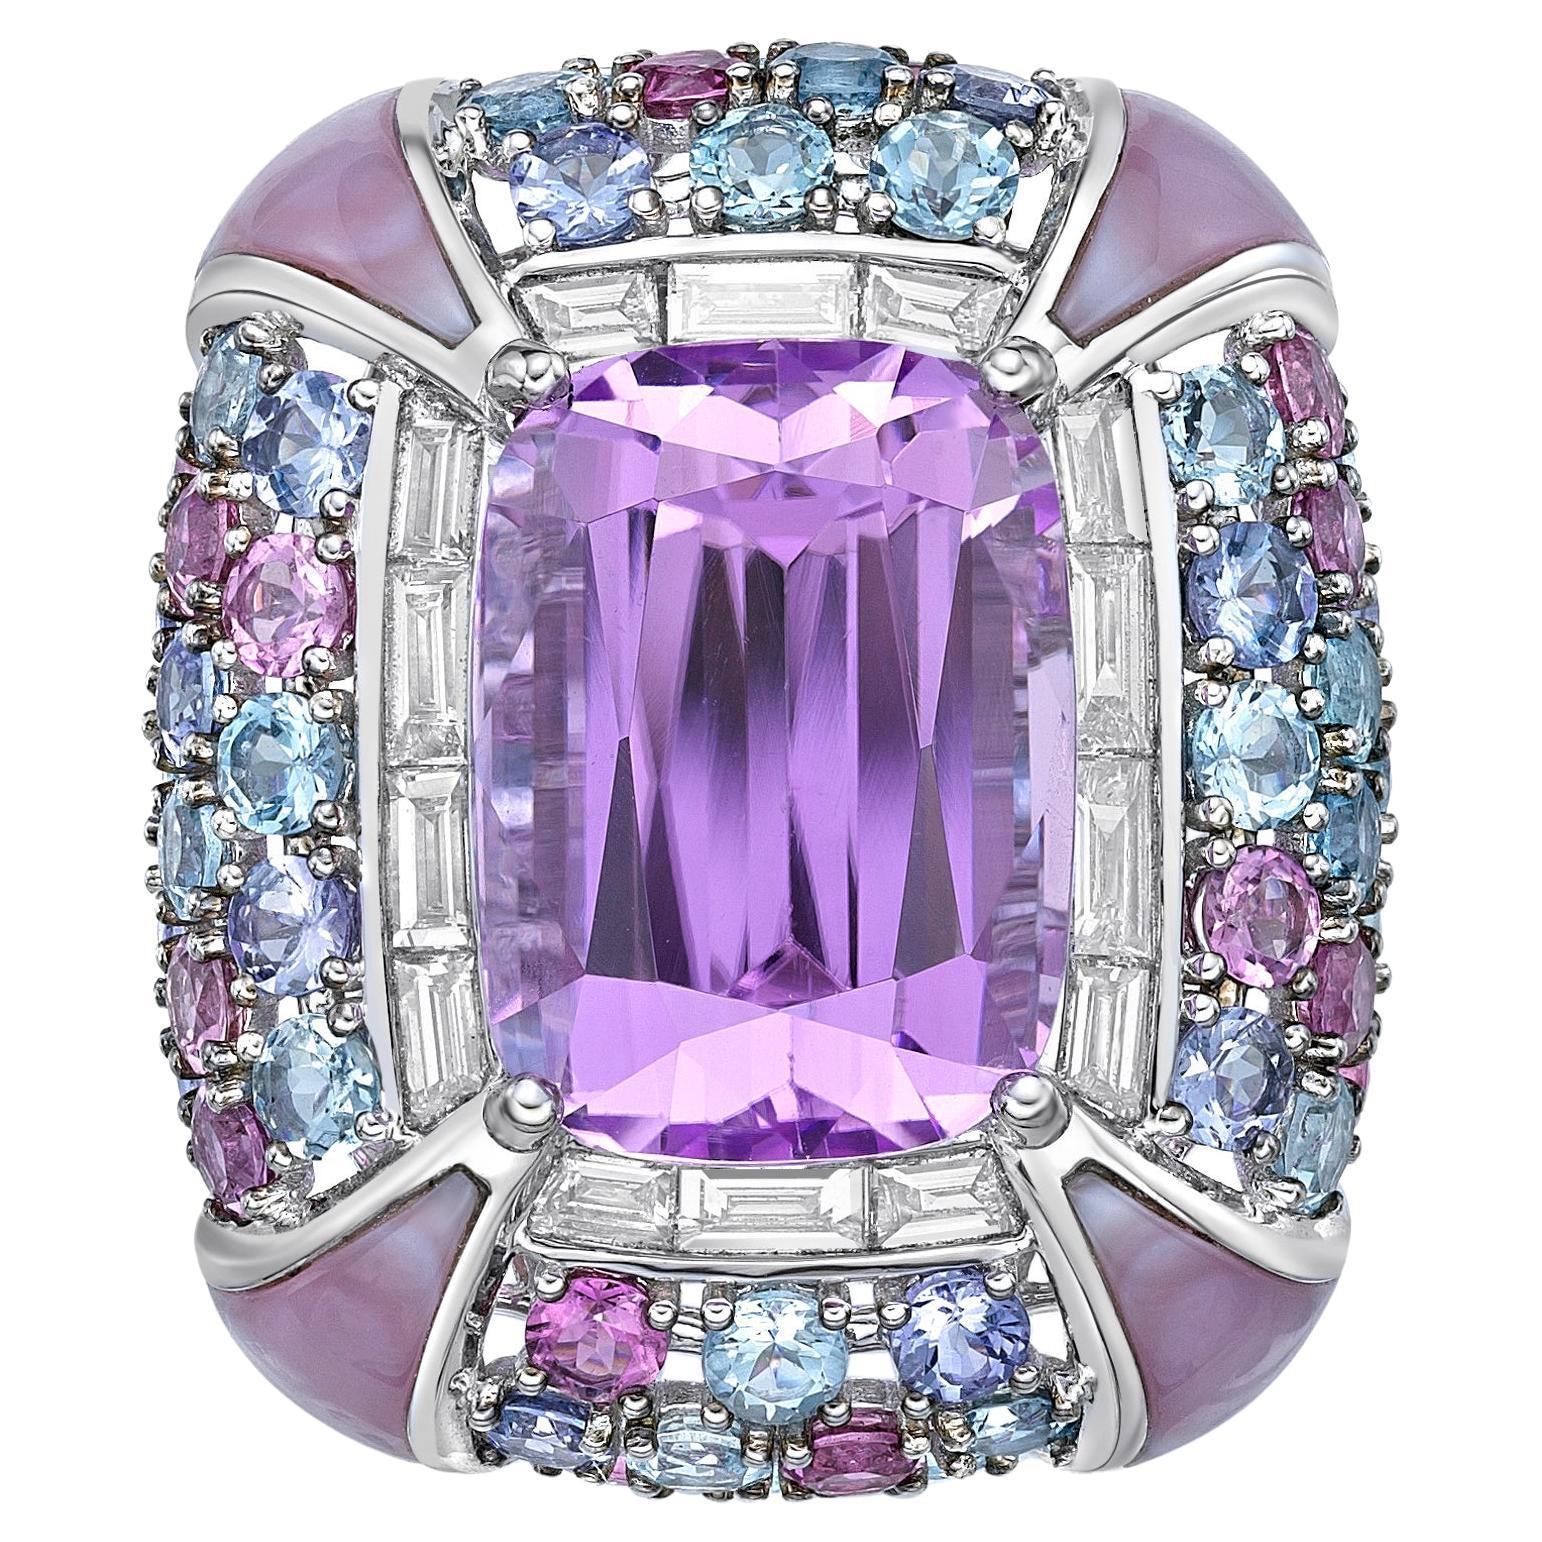 Cherry Blossom Kunzite Ring with Mother of Pearl, Gemstones & Diamond in 18KWG